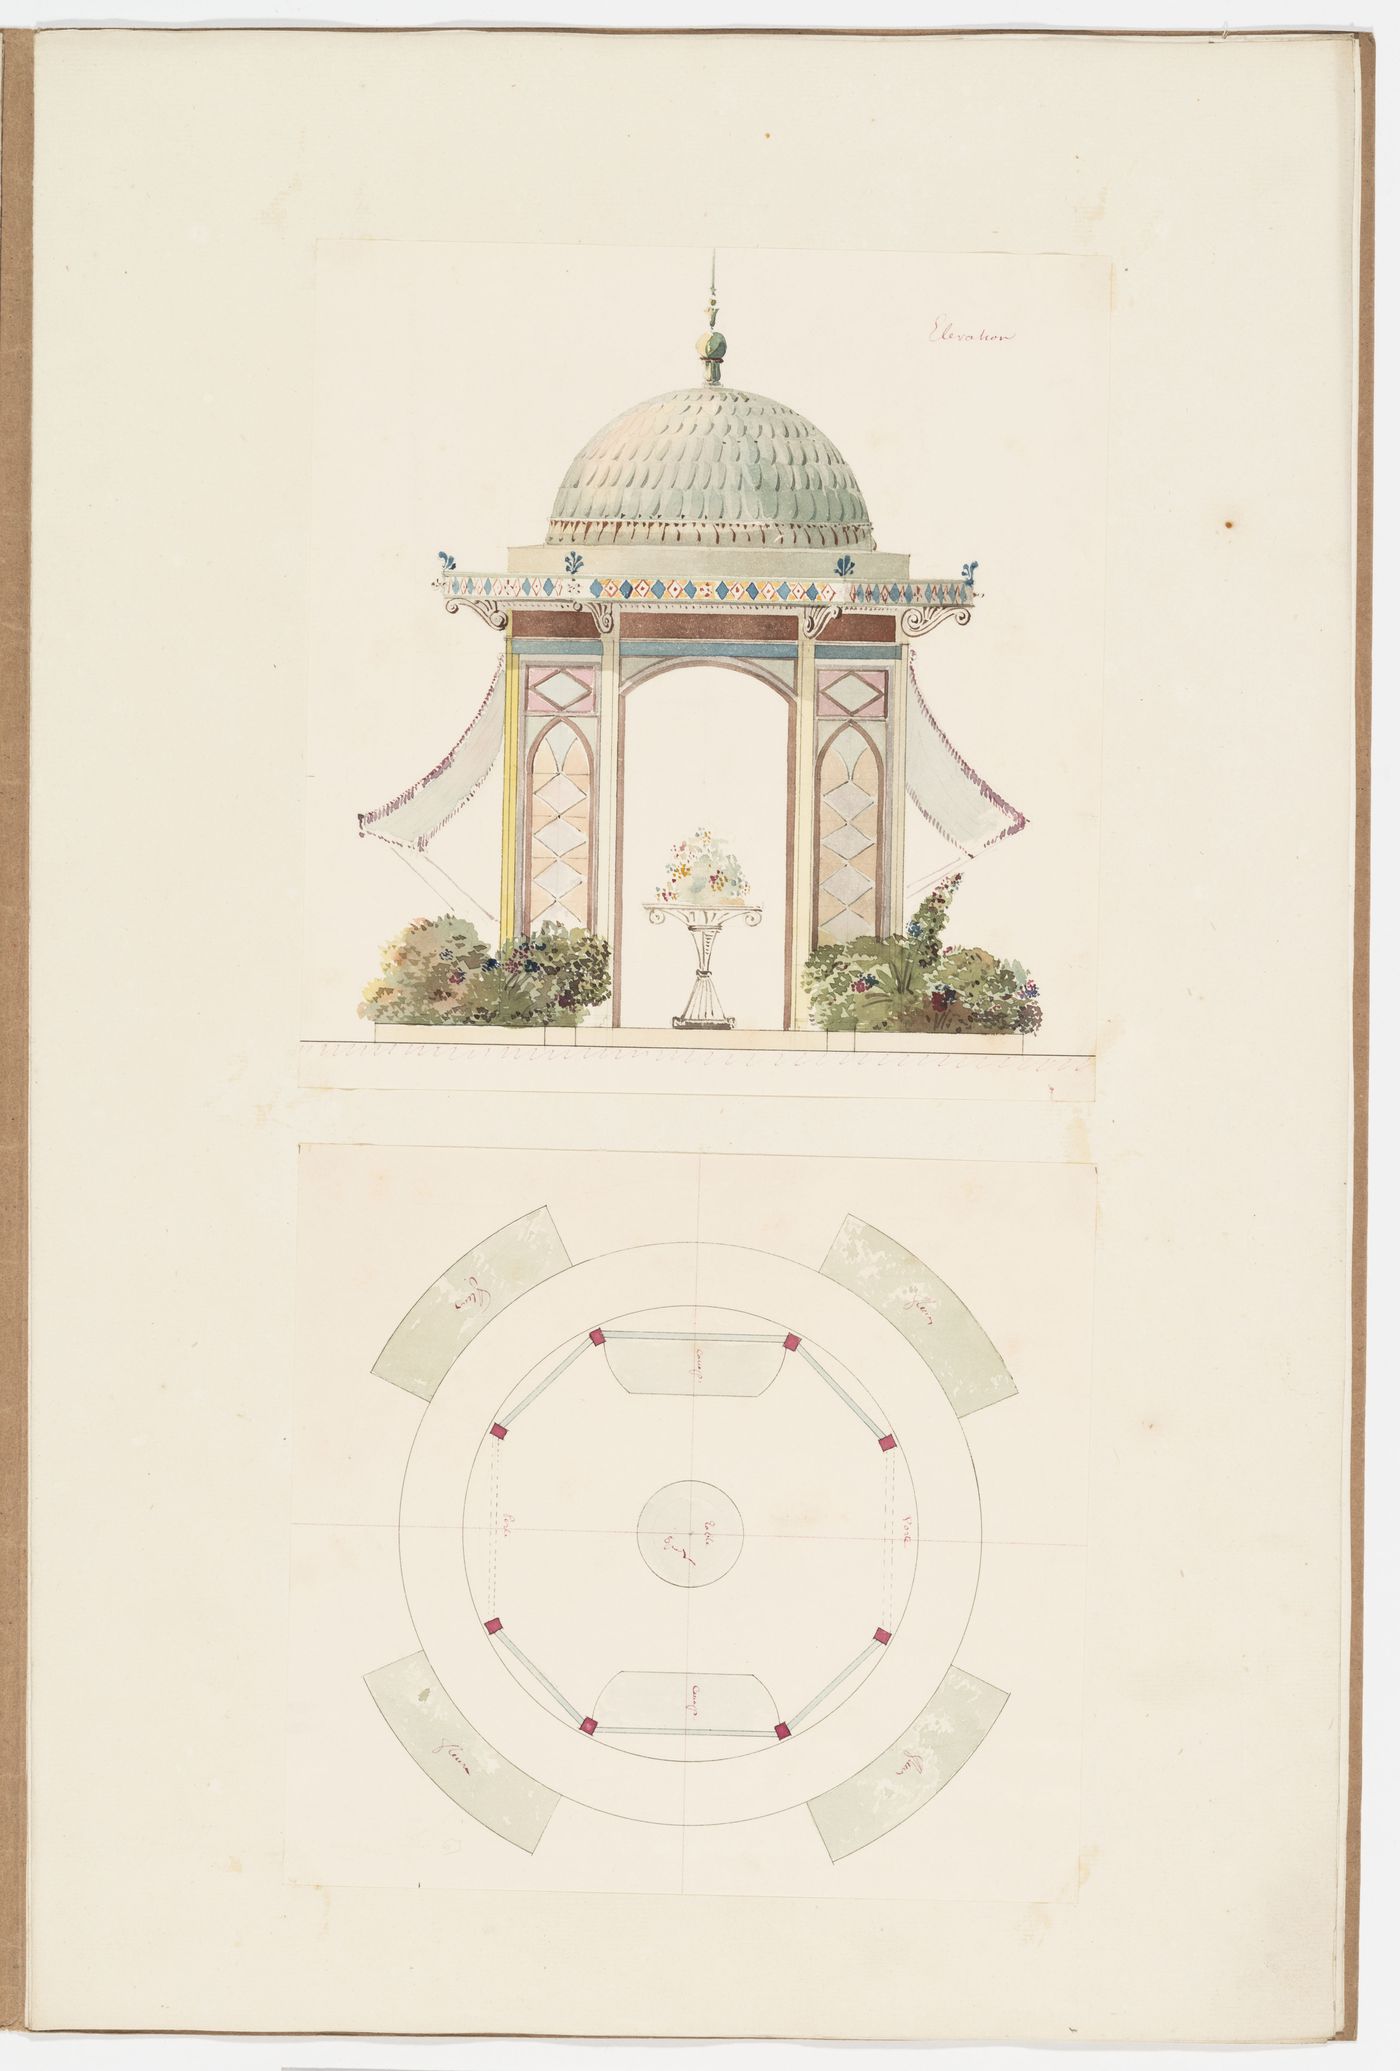 Elevation and plan for a gazebo